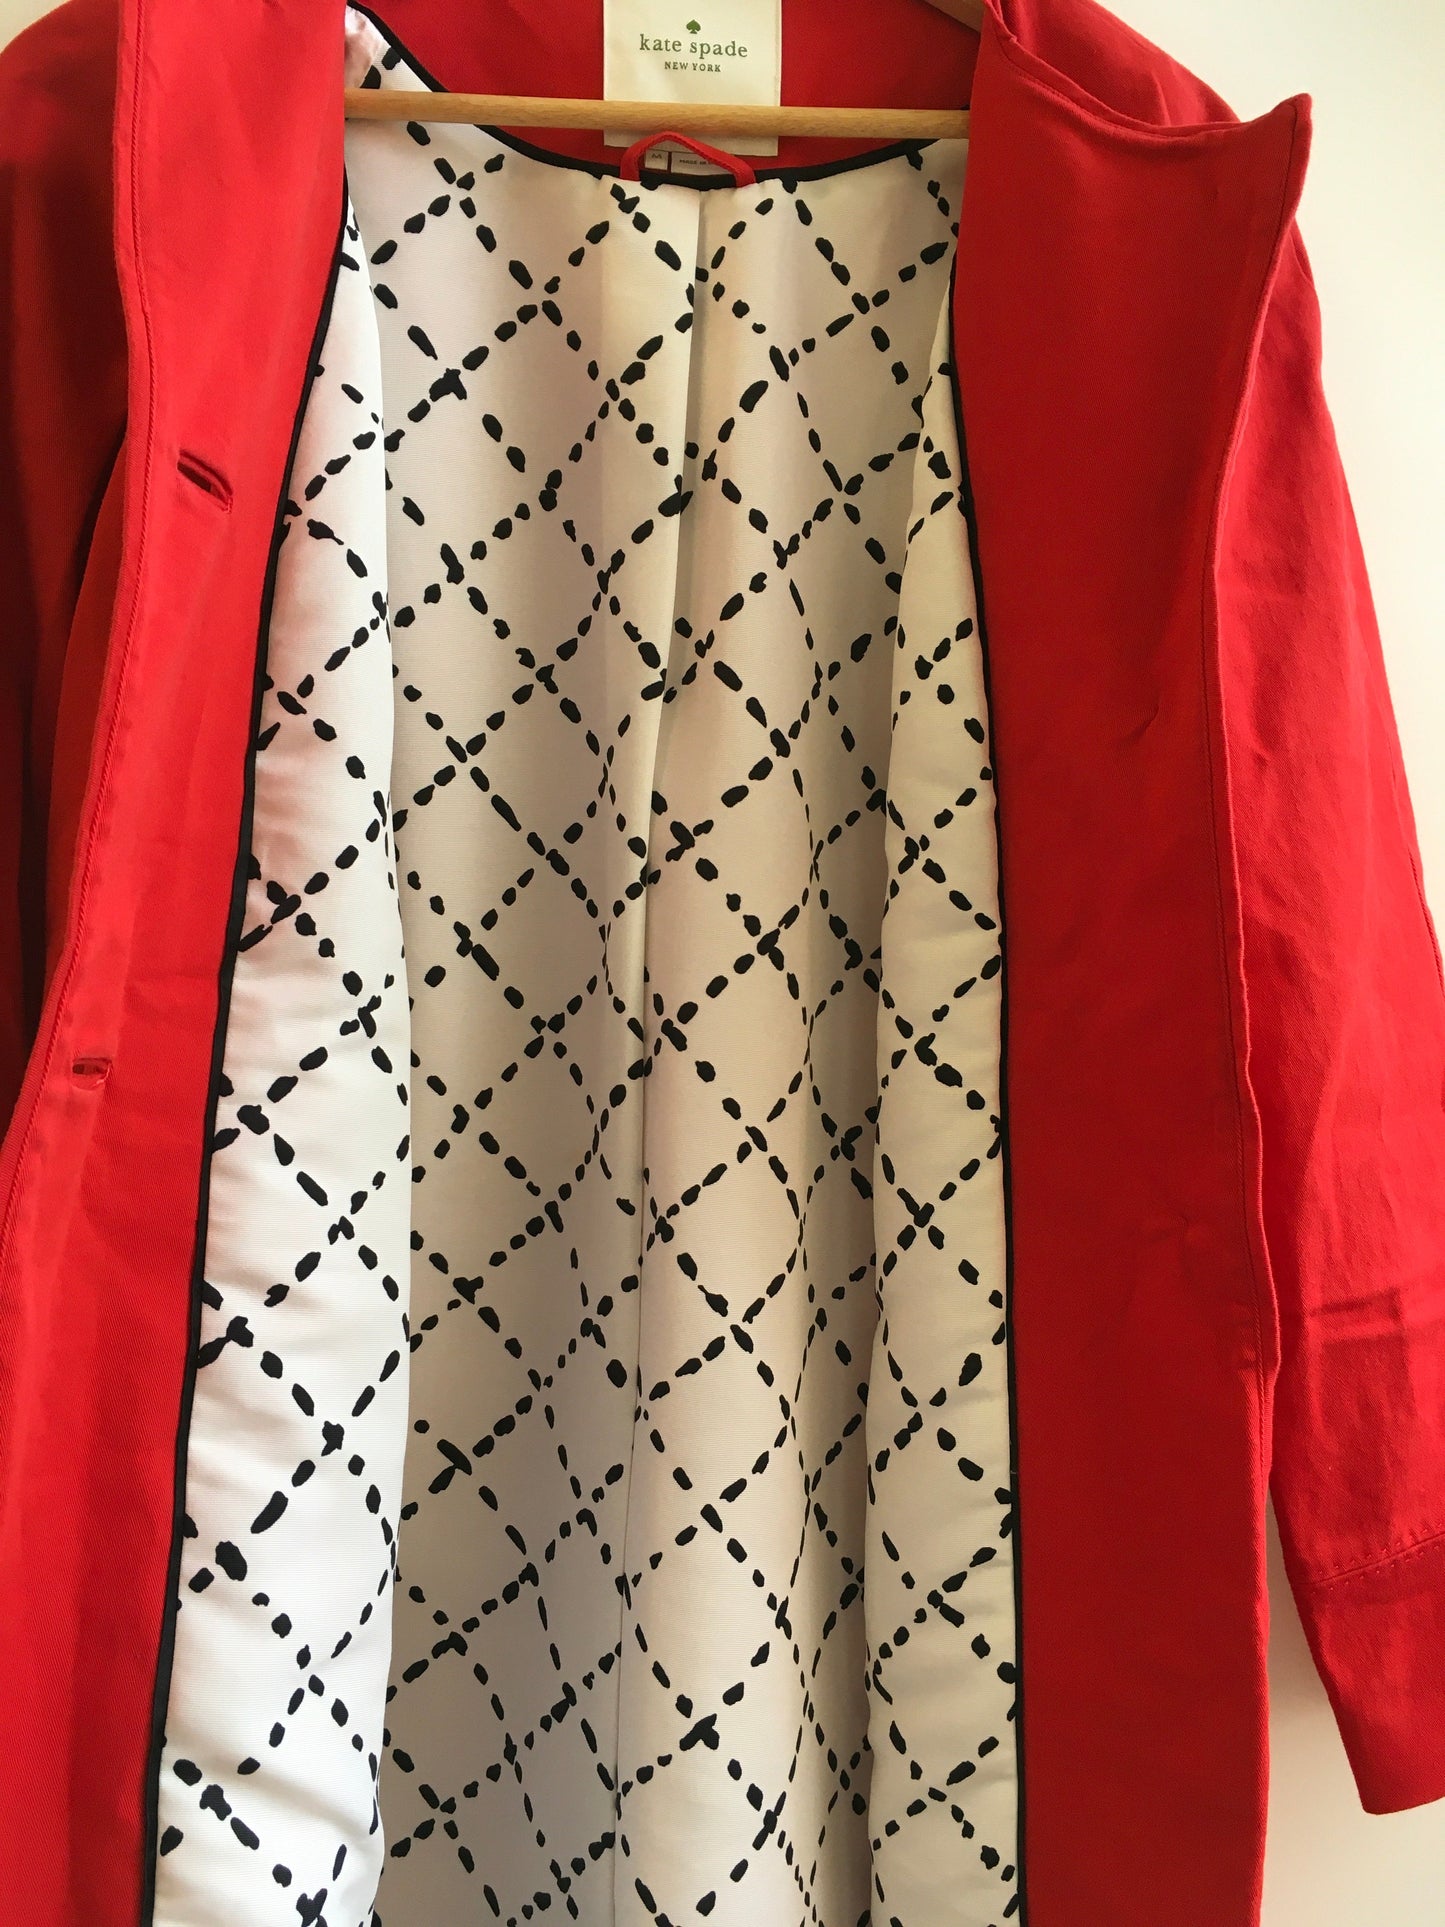 Jacket Other By Kate Spade  Size: M